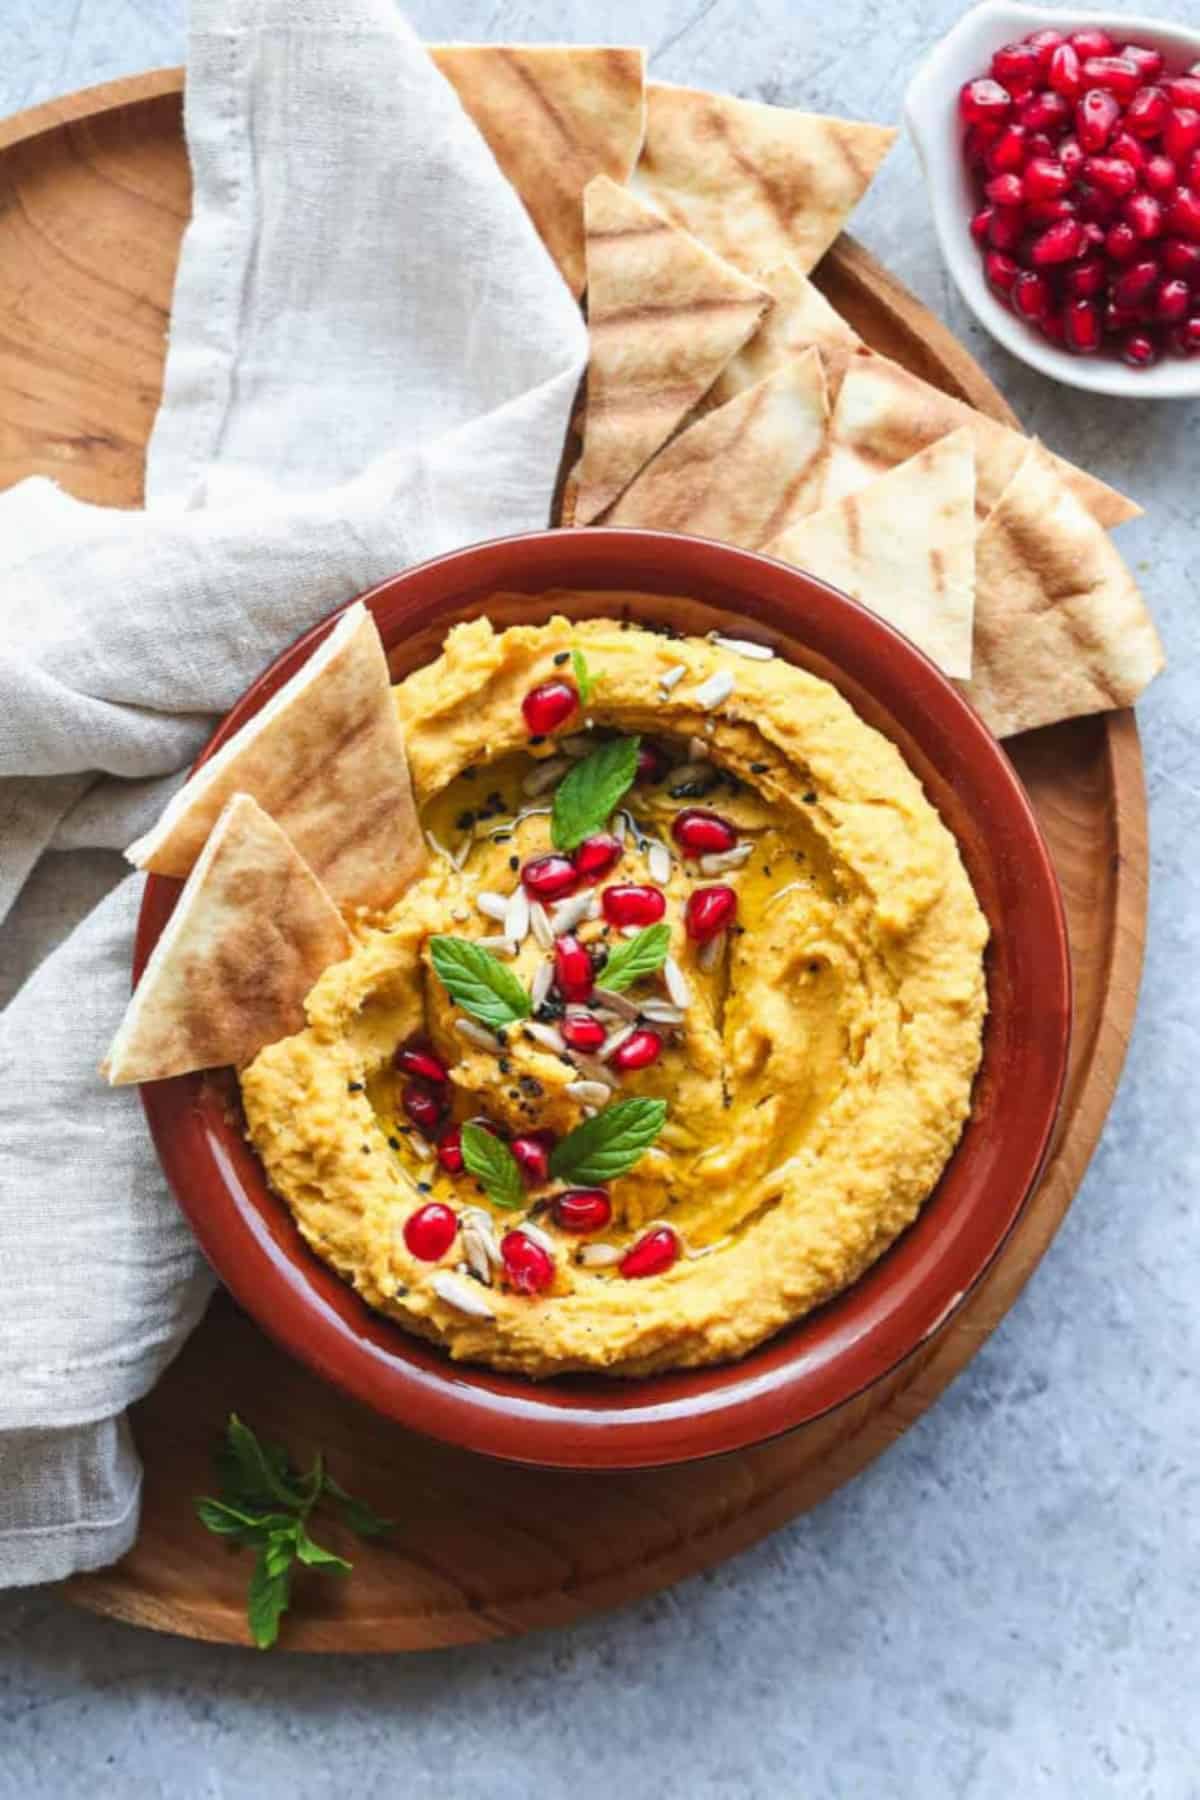 Roasted sweet potato hummus in a terracotta bowl with pita chips